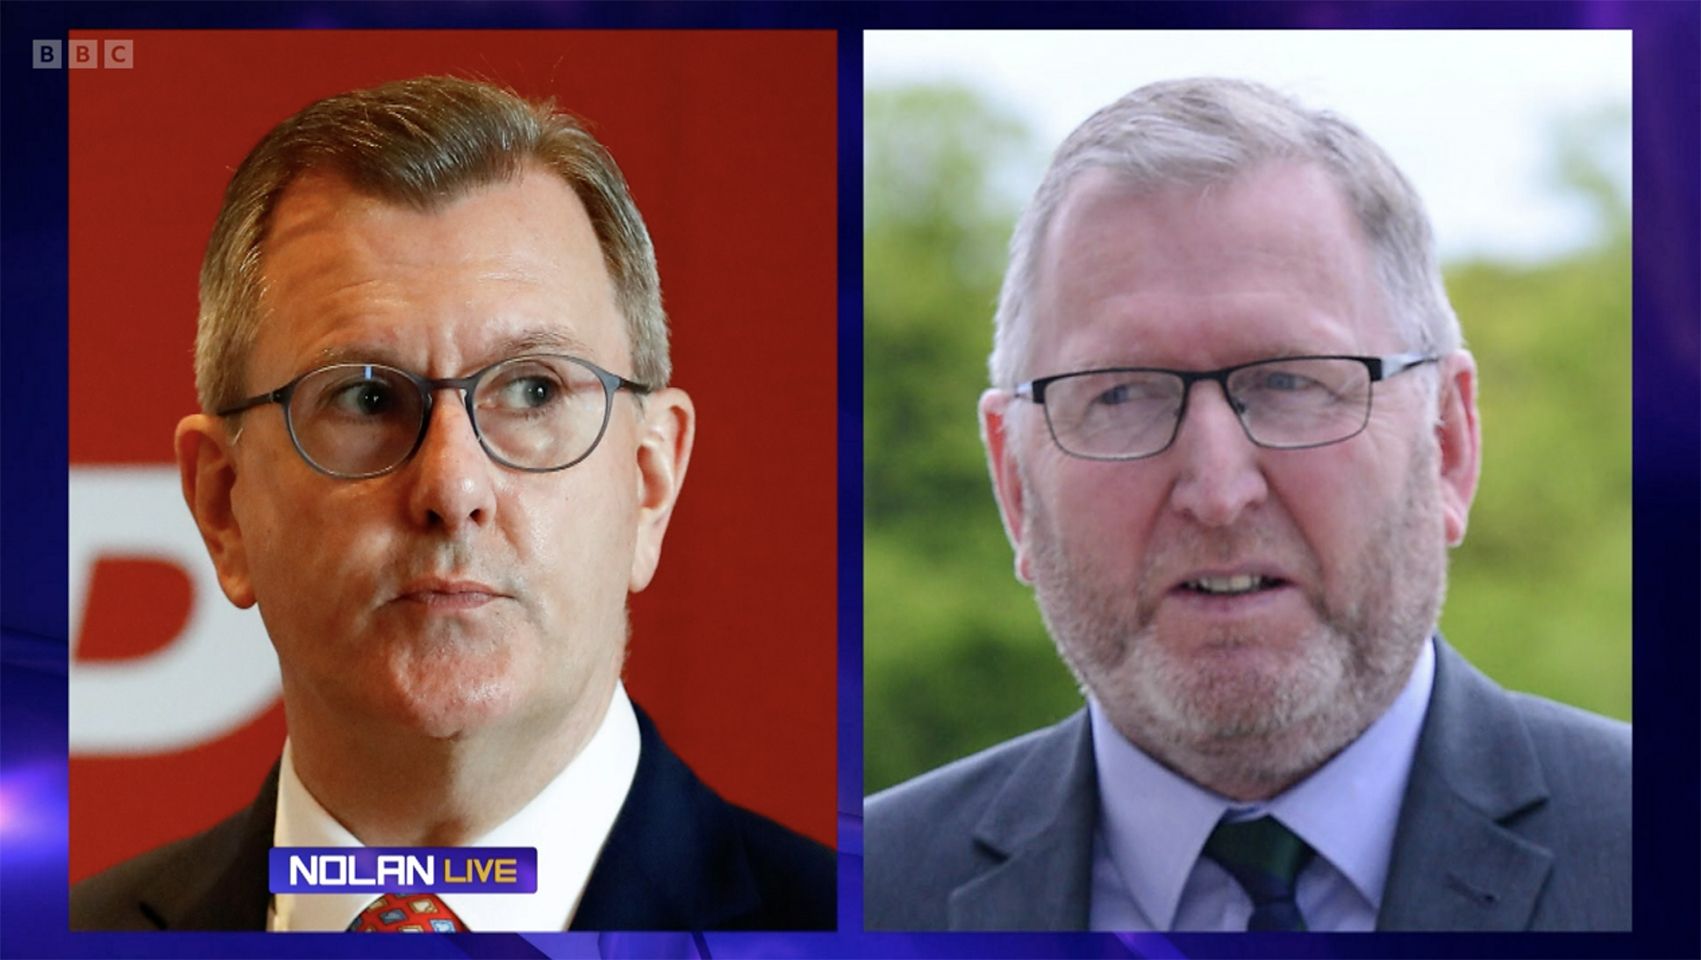 QUESTIONS: Stephen Nolan queried the failure of both DUP leader Jeffrey Donaldson and UUP leader Doug Beattie to say whether they would serve alongside a Sinn Féin First Minister if that’s what the May election produces; he put this image up on the screen